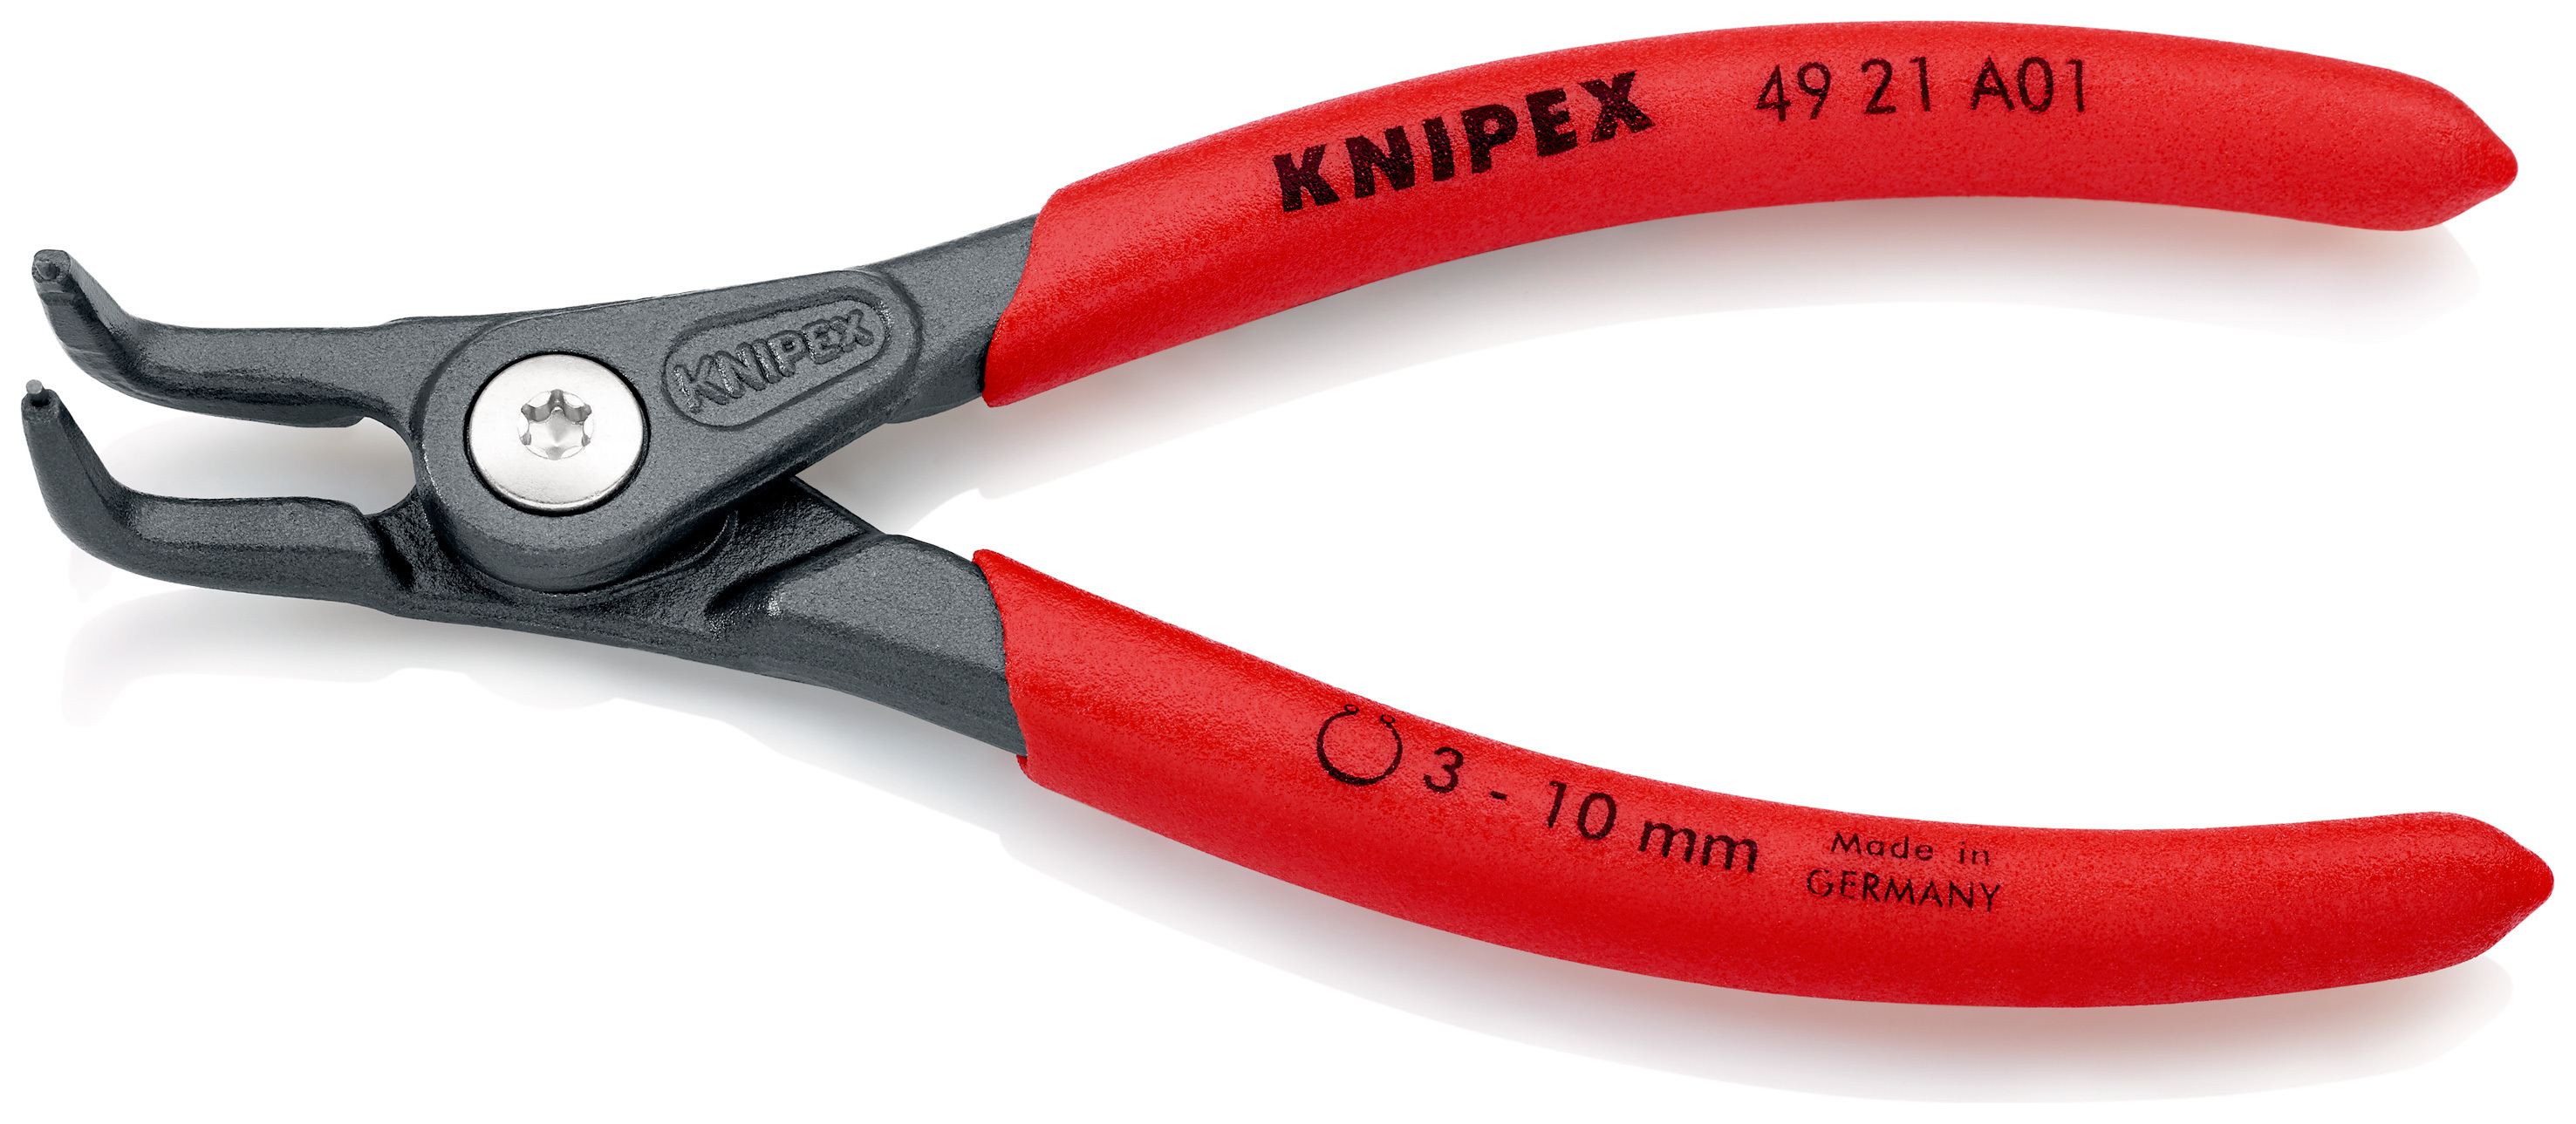 Pince circlips ext.coude 3 KNIPEX - 4921A01SB